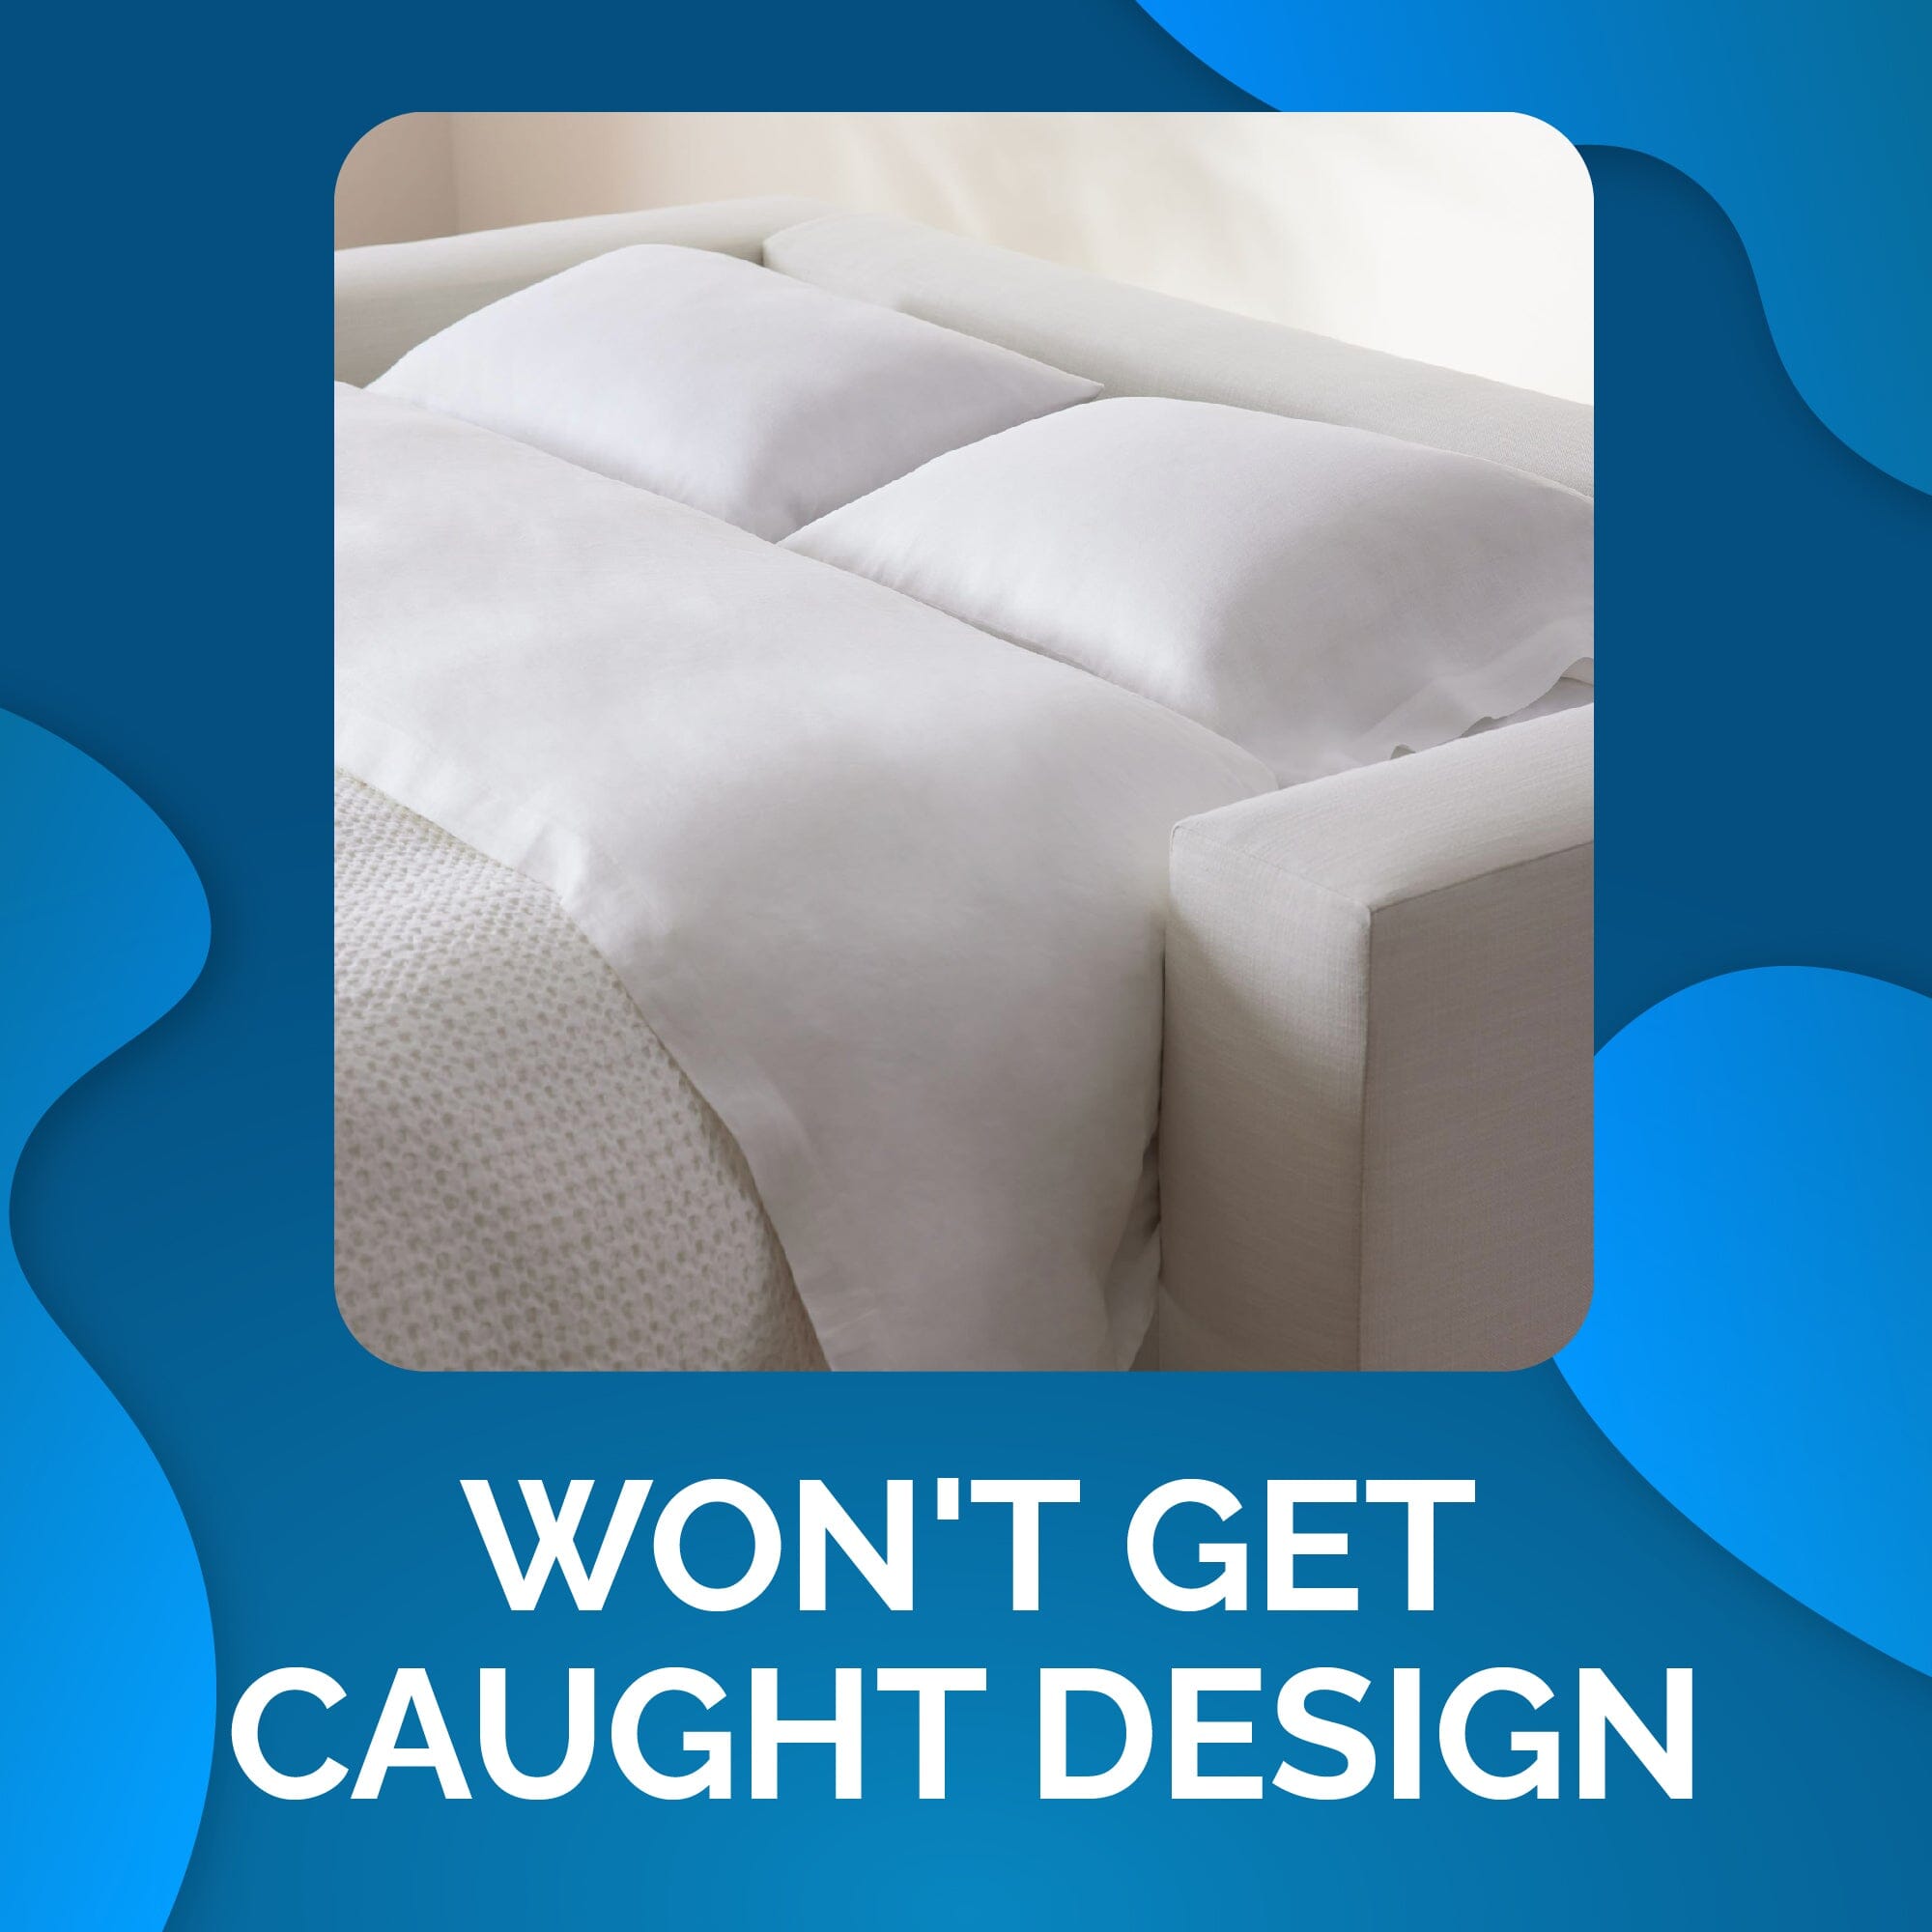 Sofa Sleeper Bed Sheet by Bargoose Home Textiles Sheets Bargoose Home Textiles, Inc. 